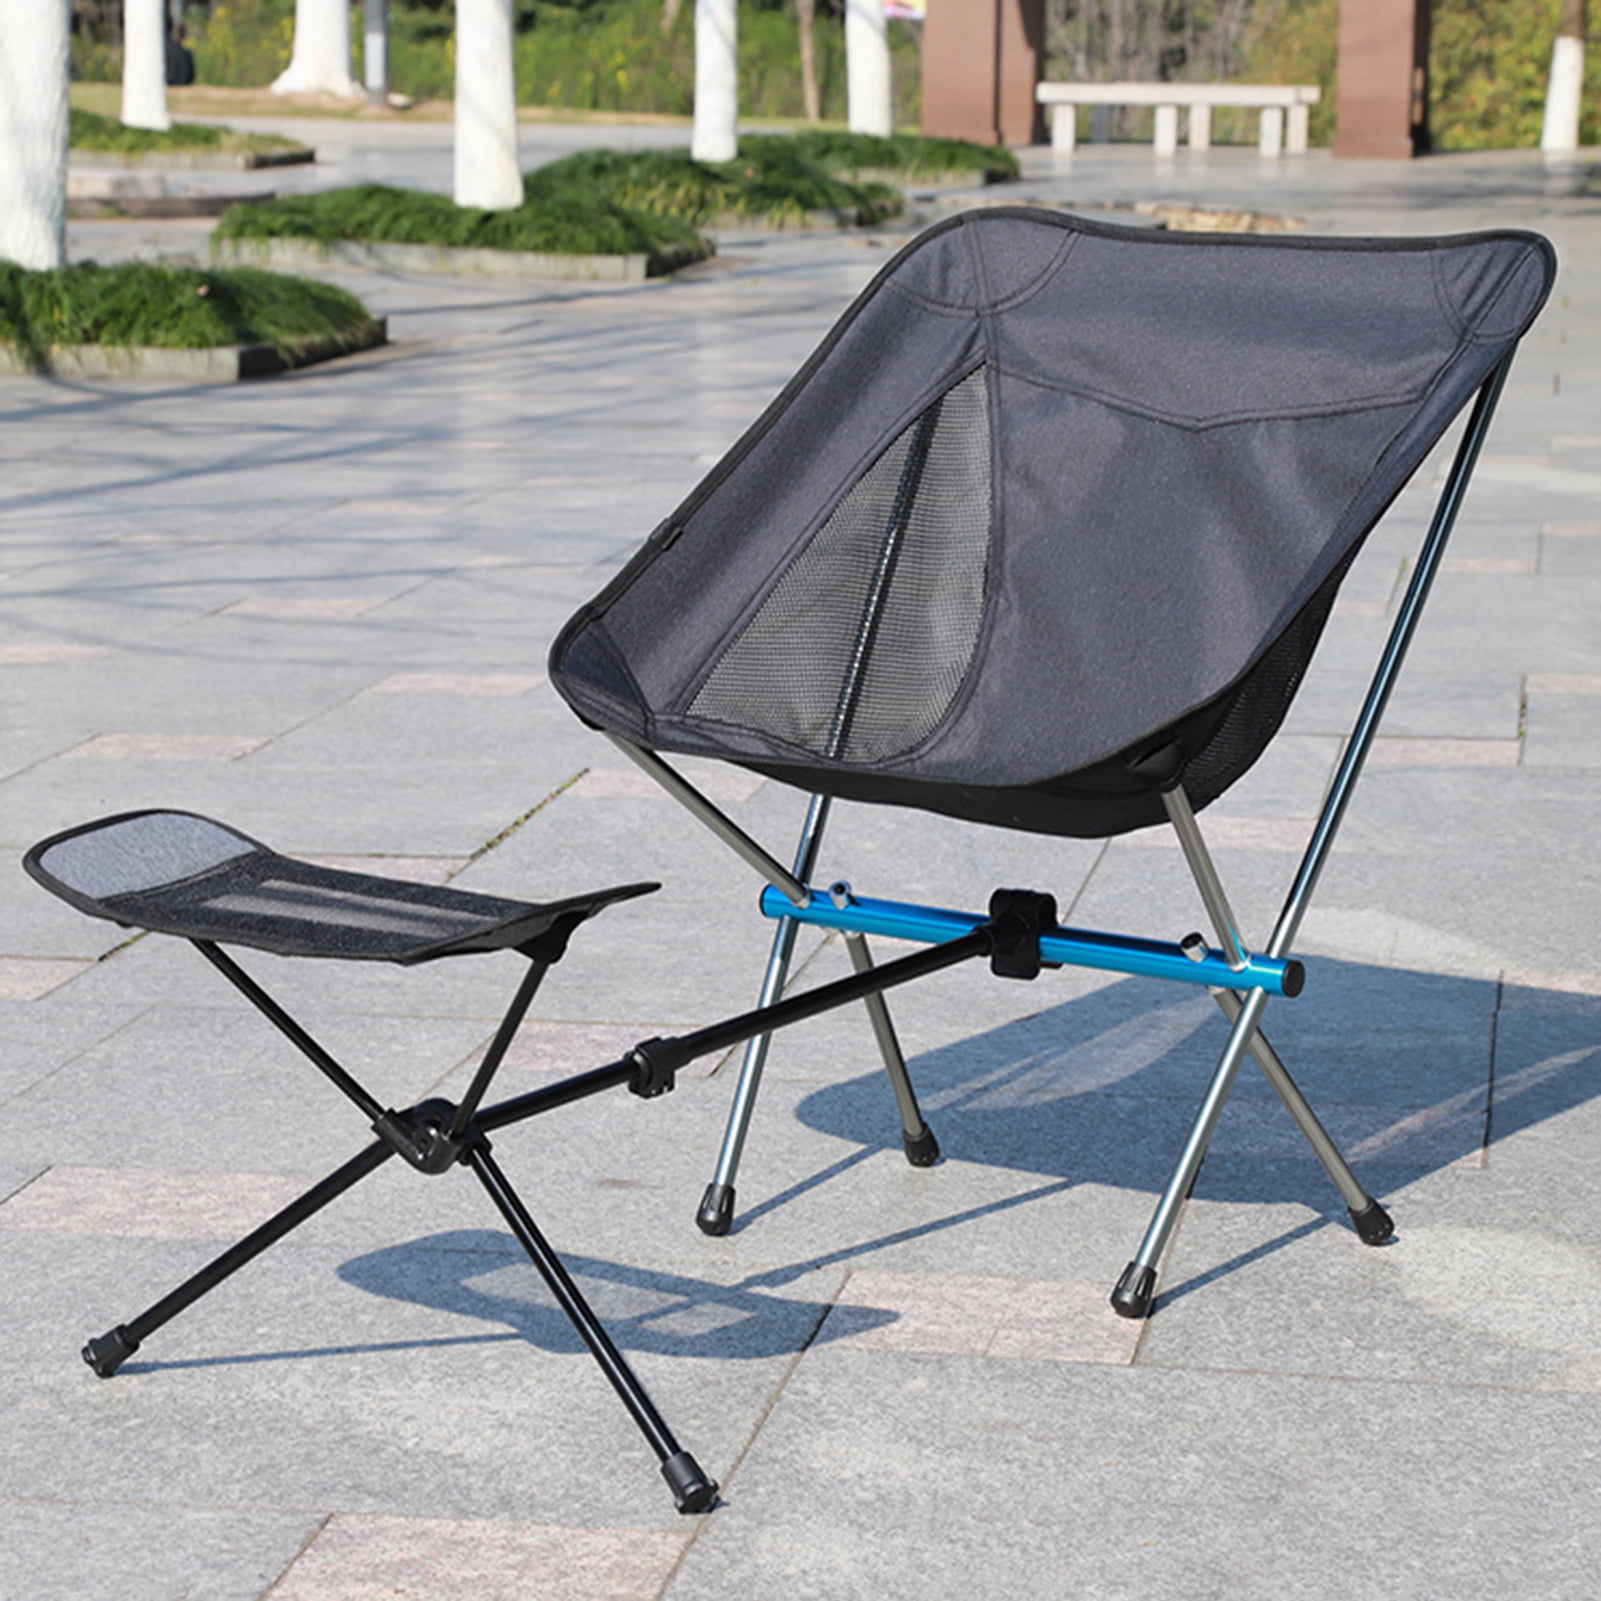 Portable Lightweight Folding Camping Chair for Backpacking Hiking Picnic 